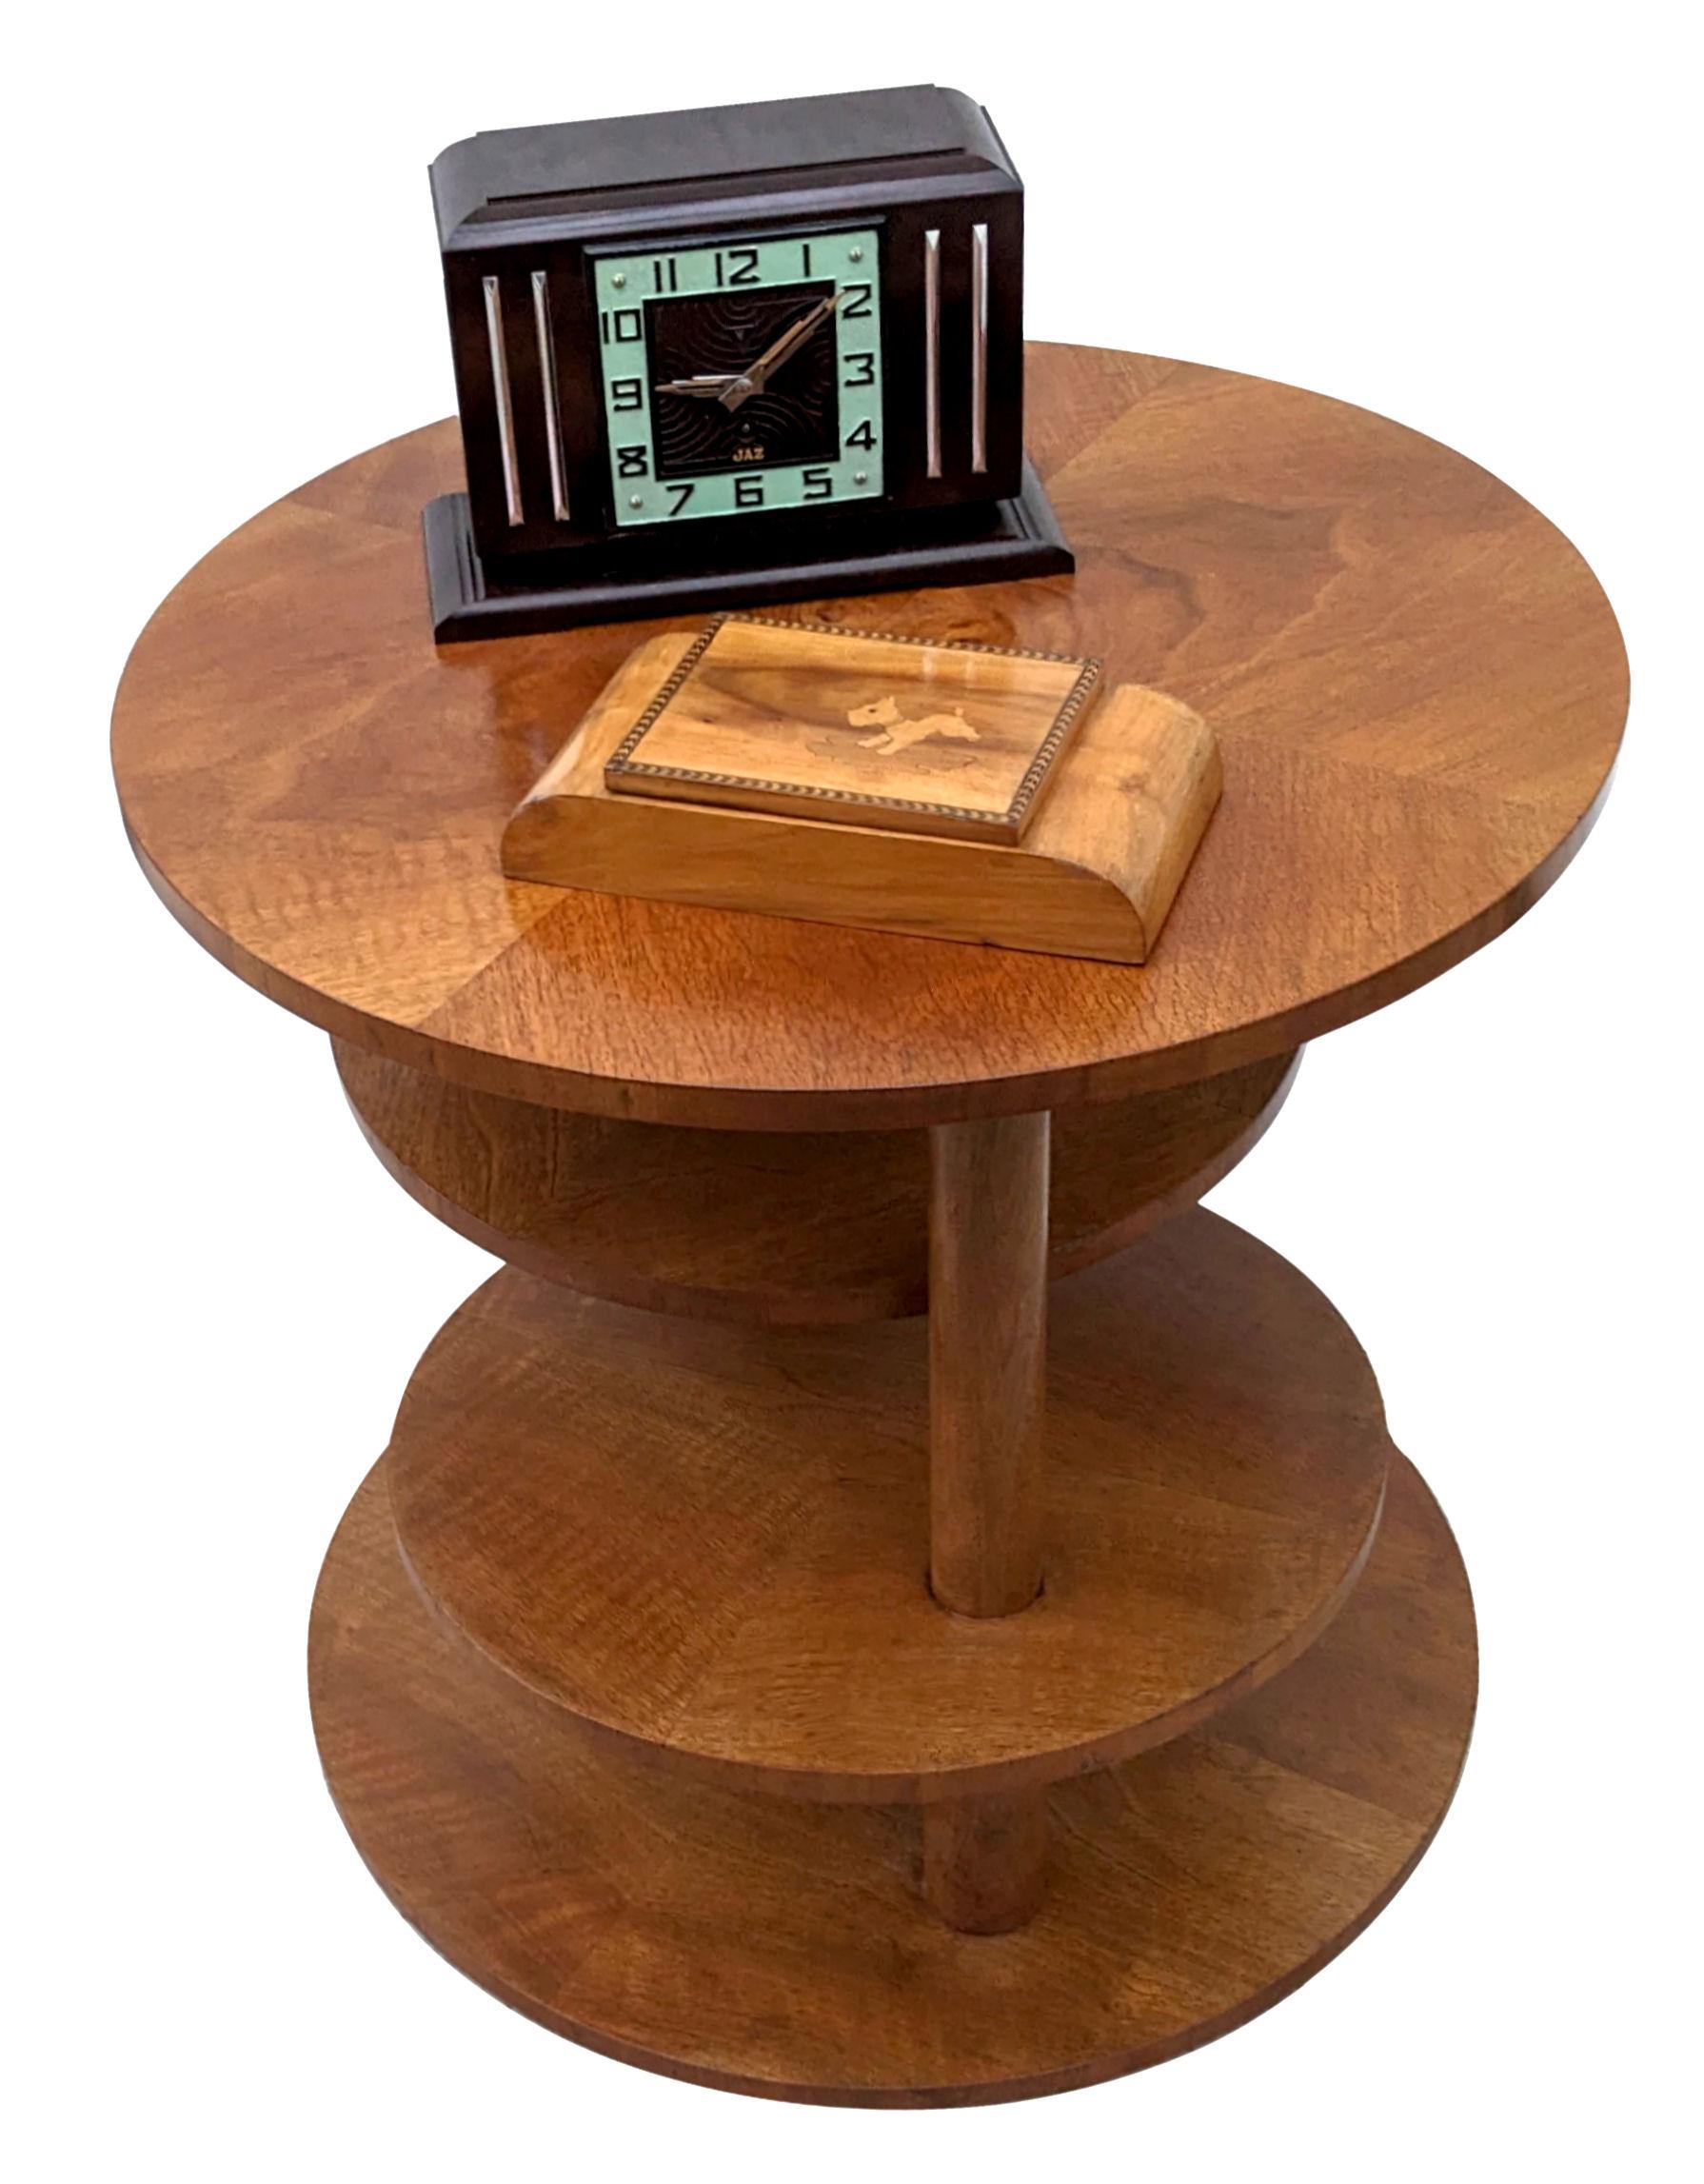 For your consideration and for those seeking the more unique pieces this table might be of interest. Quite substantial in size is this multi tiered circular table. The under tiers stack and fold in nicely, but these can also swing out offering more